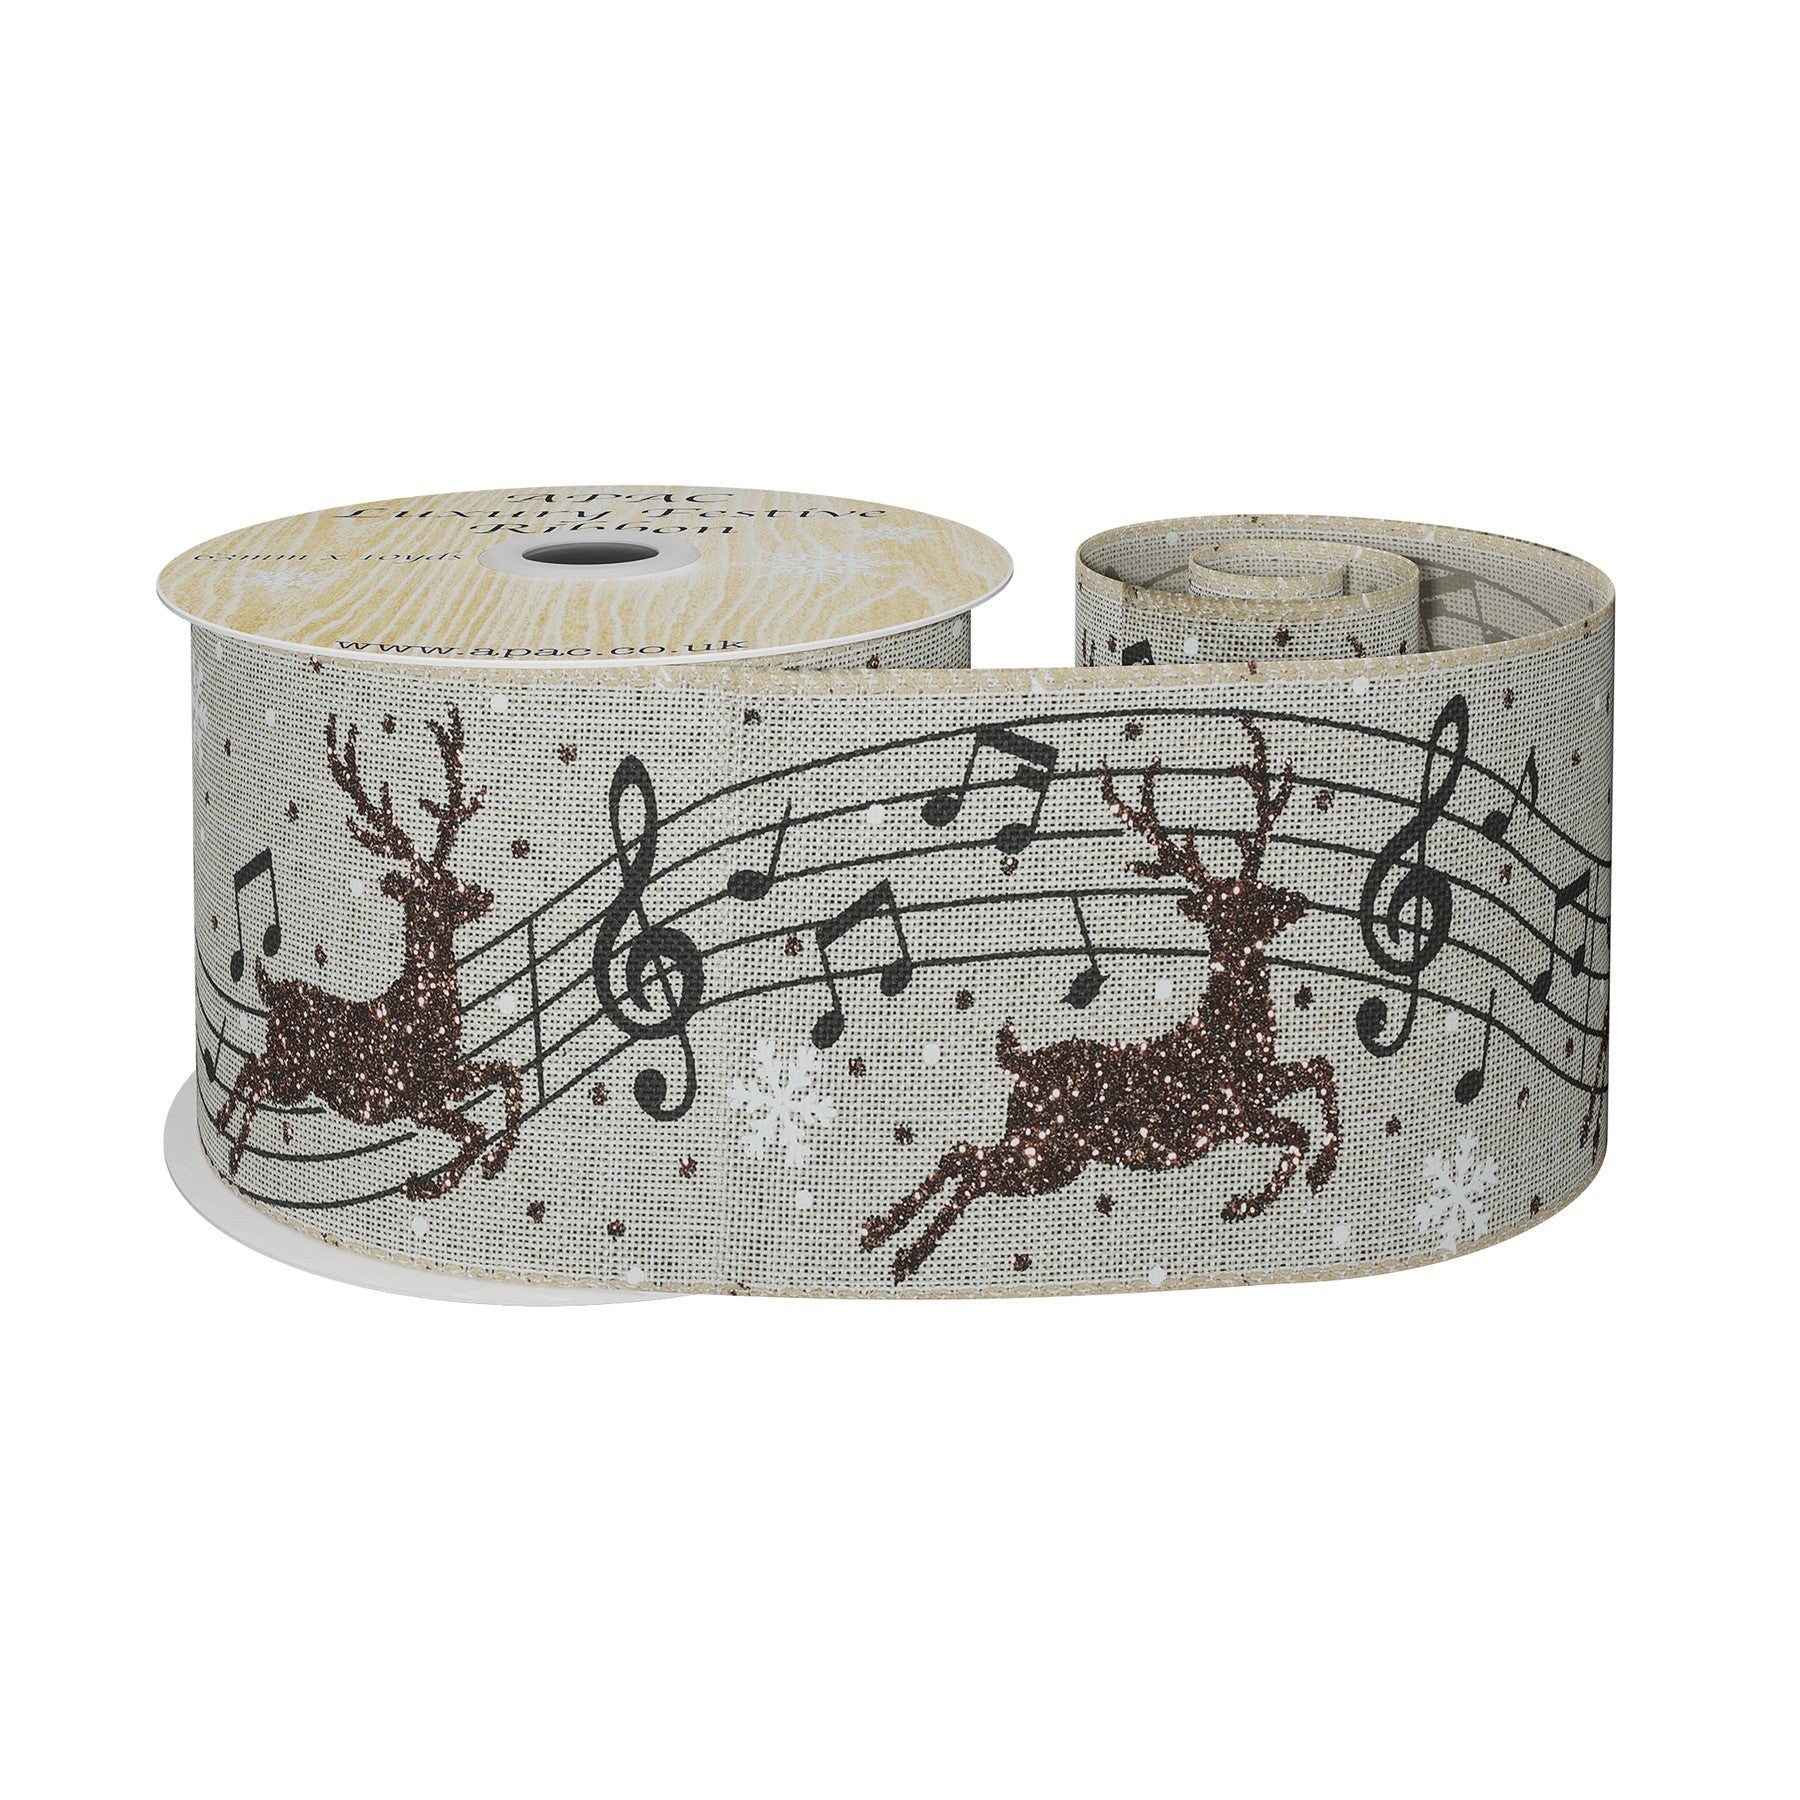 View Natural Ribbon with Reindeer and Musical Notes 63mm x 10yd information